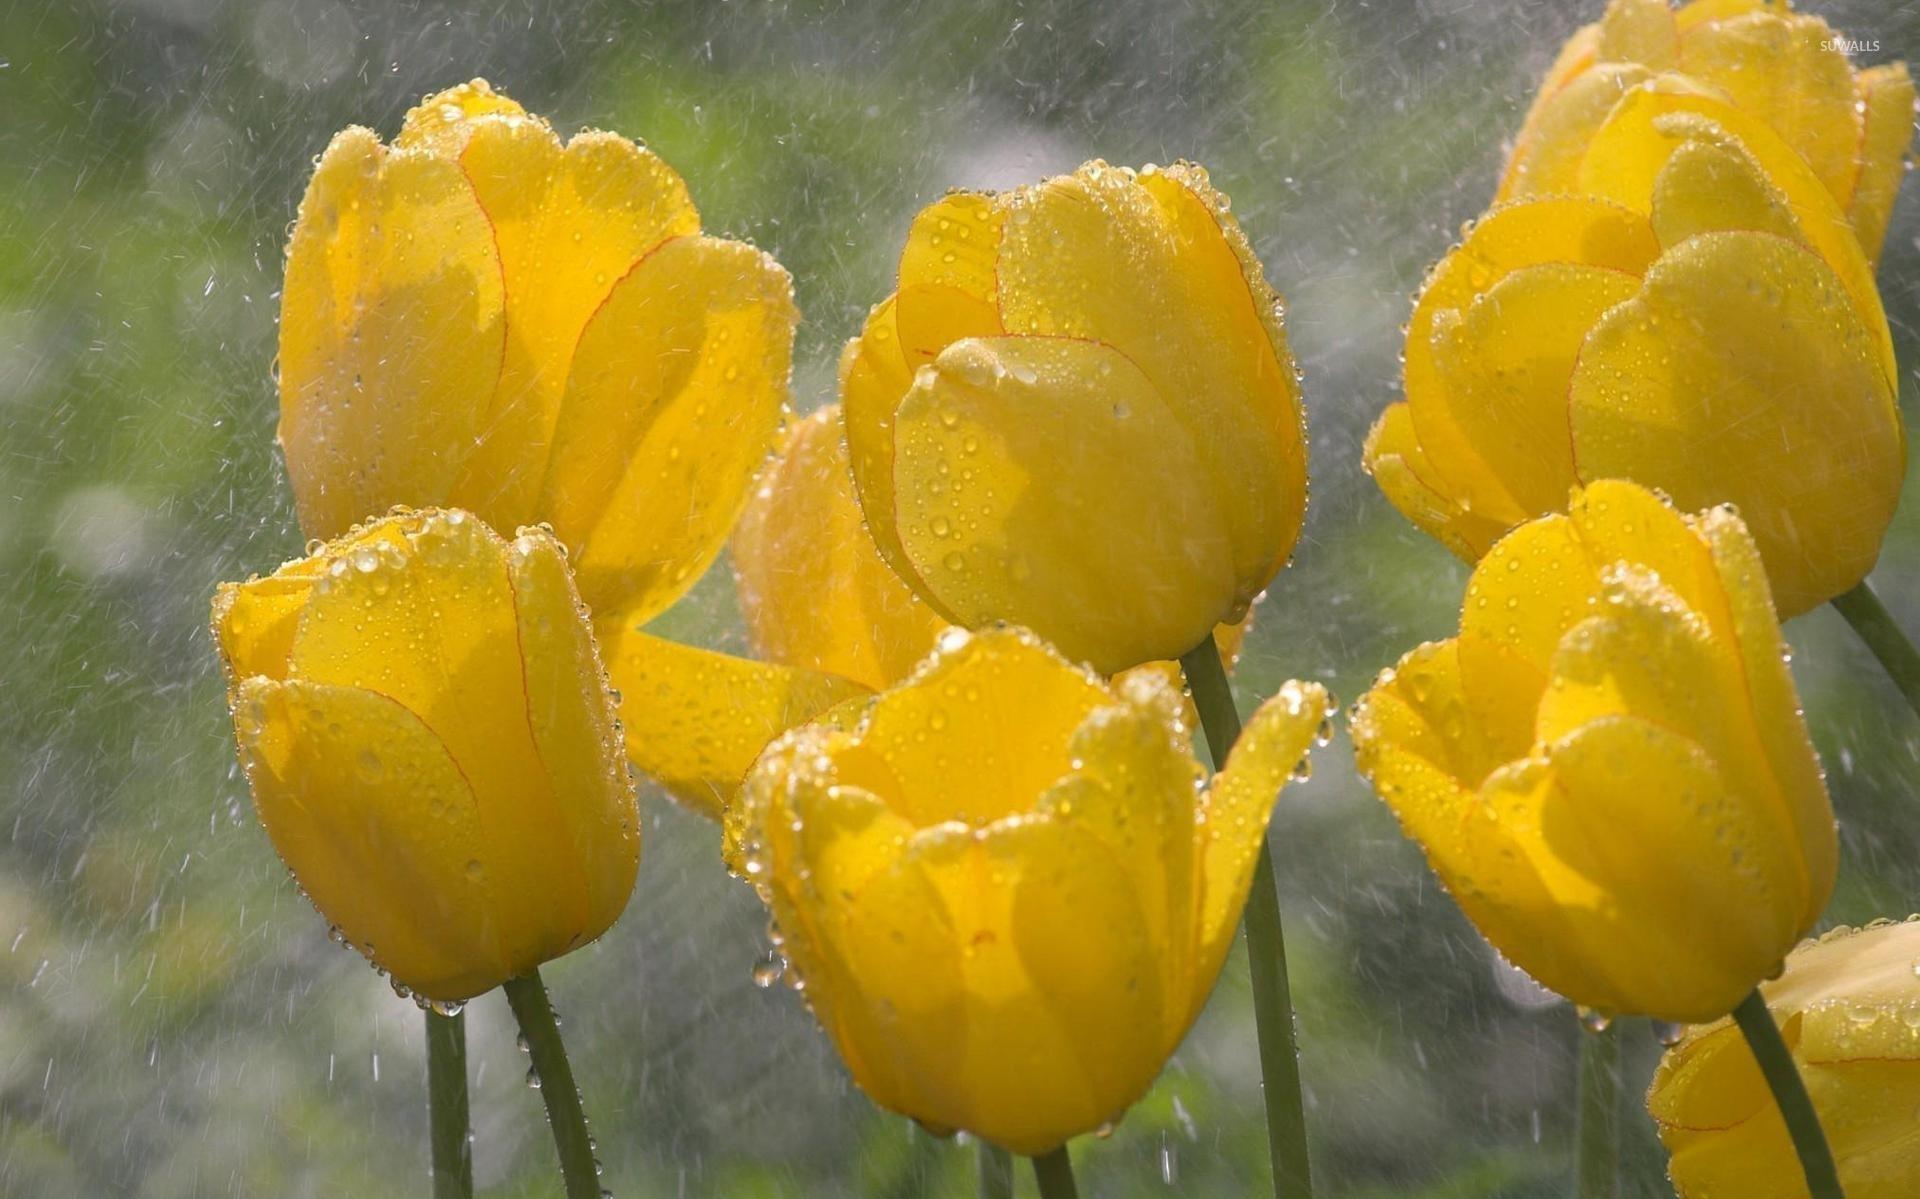 Yellow Tulips On A Rainy Day Wallpaper Flower